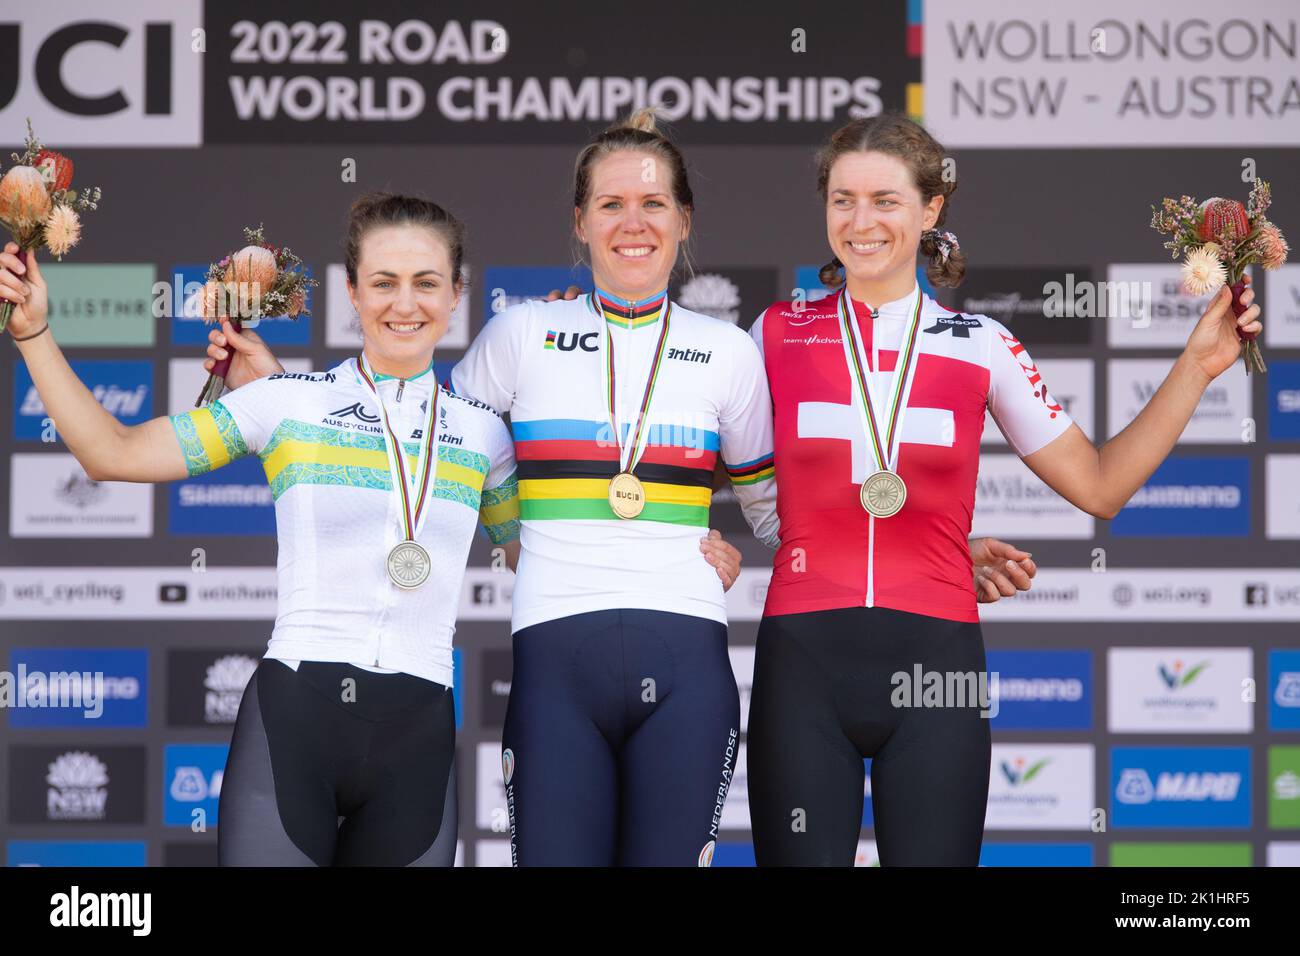 Ellen van Dijk of the Netherlands, winner of the Women's elite Time Trial on the podium at the 2022 UCI Road Cycling World Championships. Stock Photo